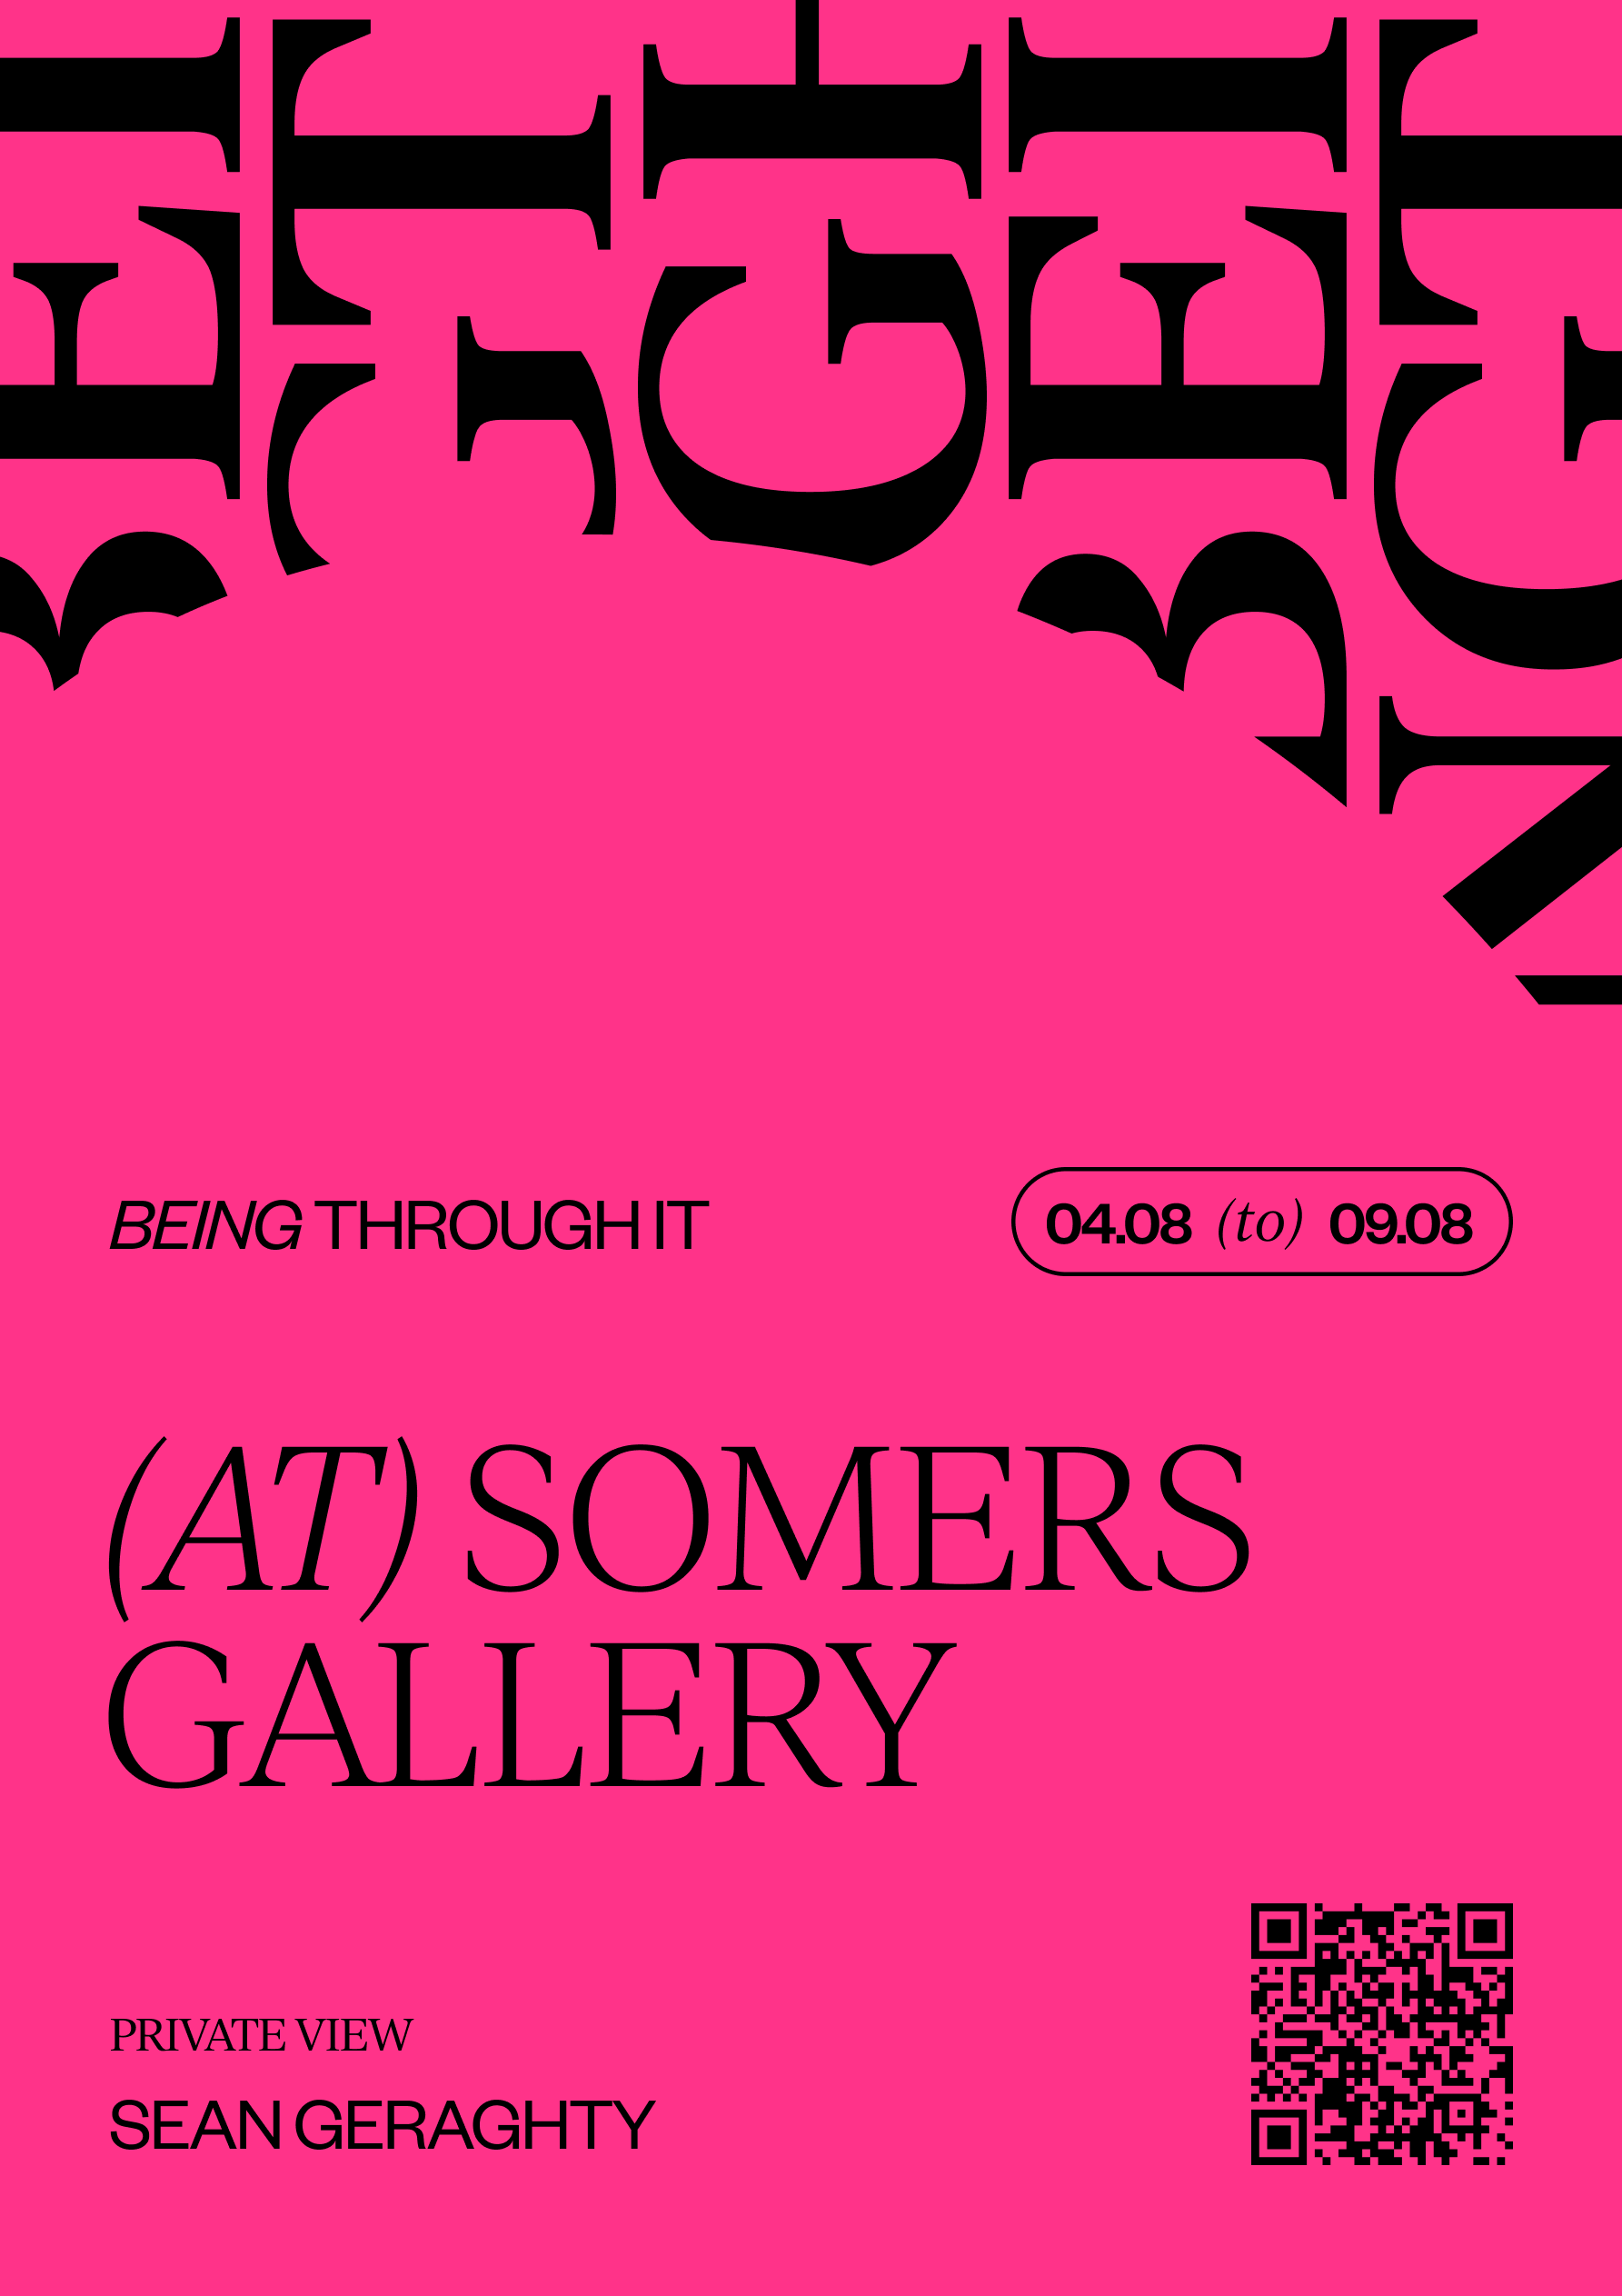 Artwork for a gallery exhibition at Somers Gallery